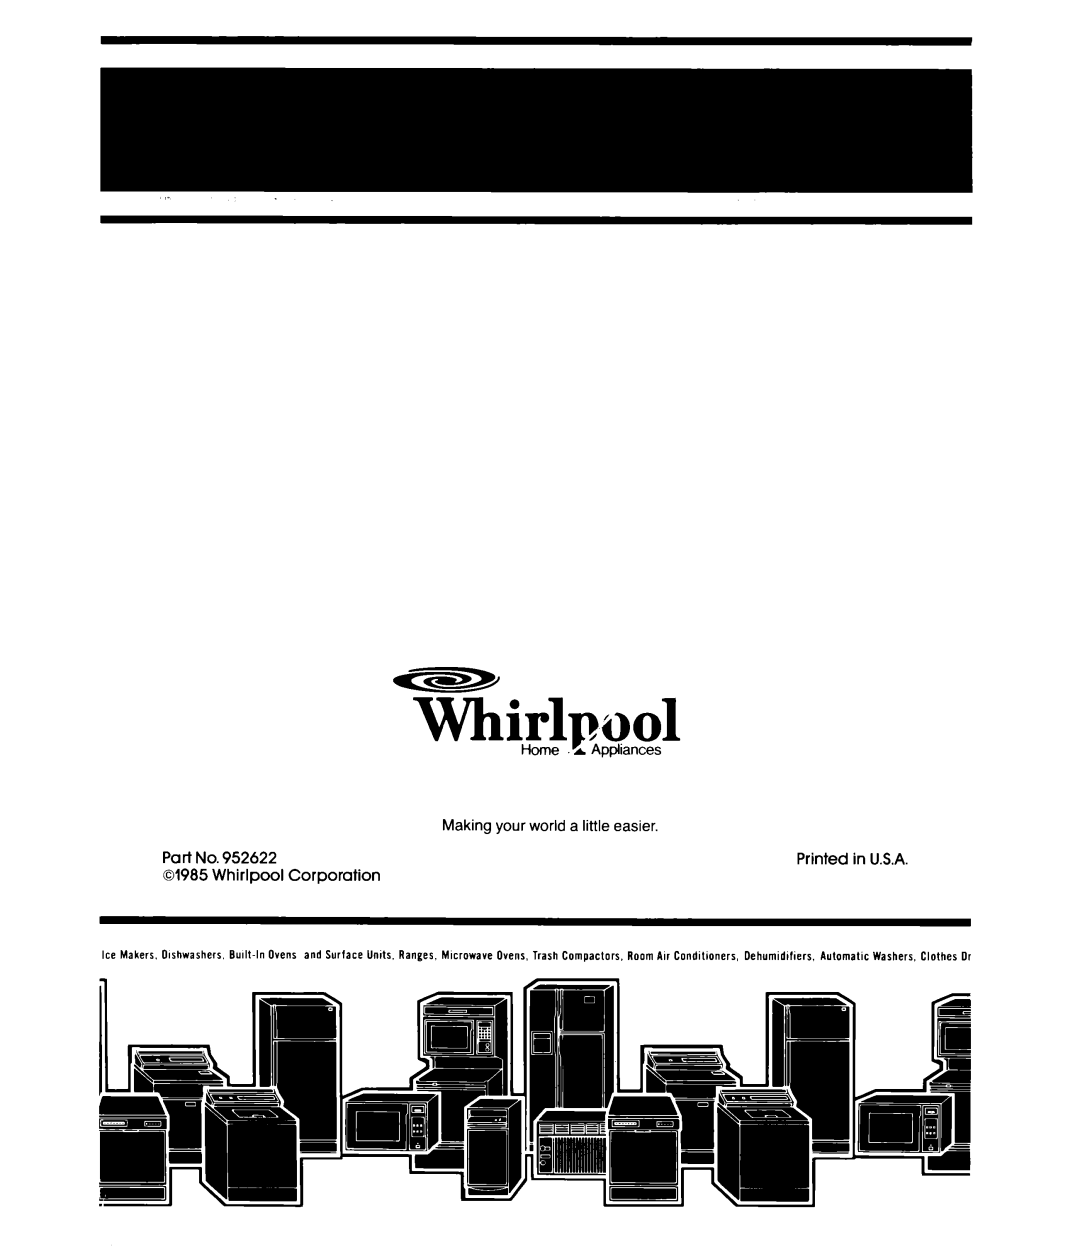 Whirlpool AD0402XM0 manual Whirlpool, Home L /Appliances, Making your world a little easier, Corporation 